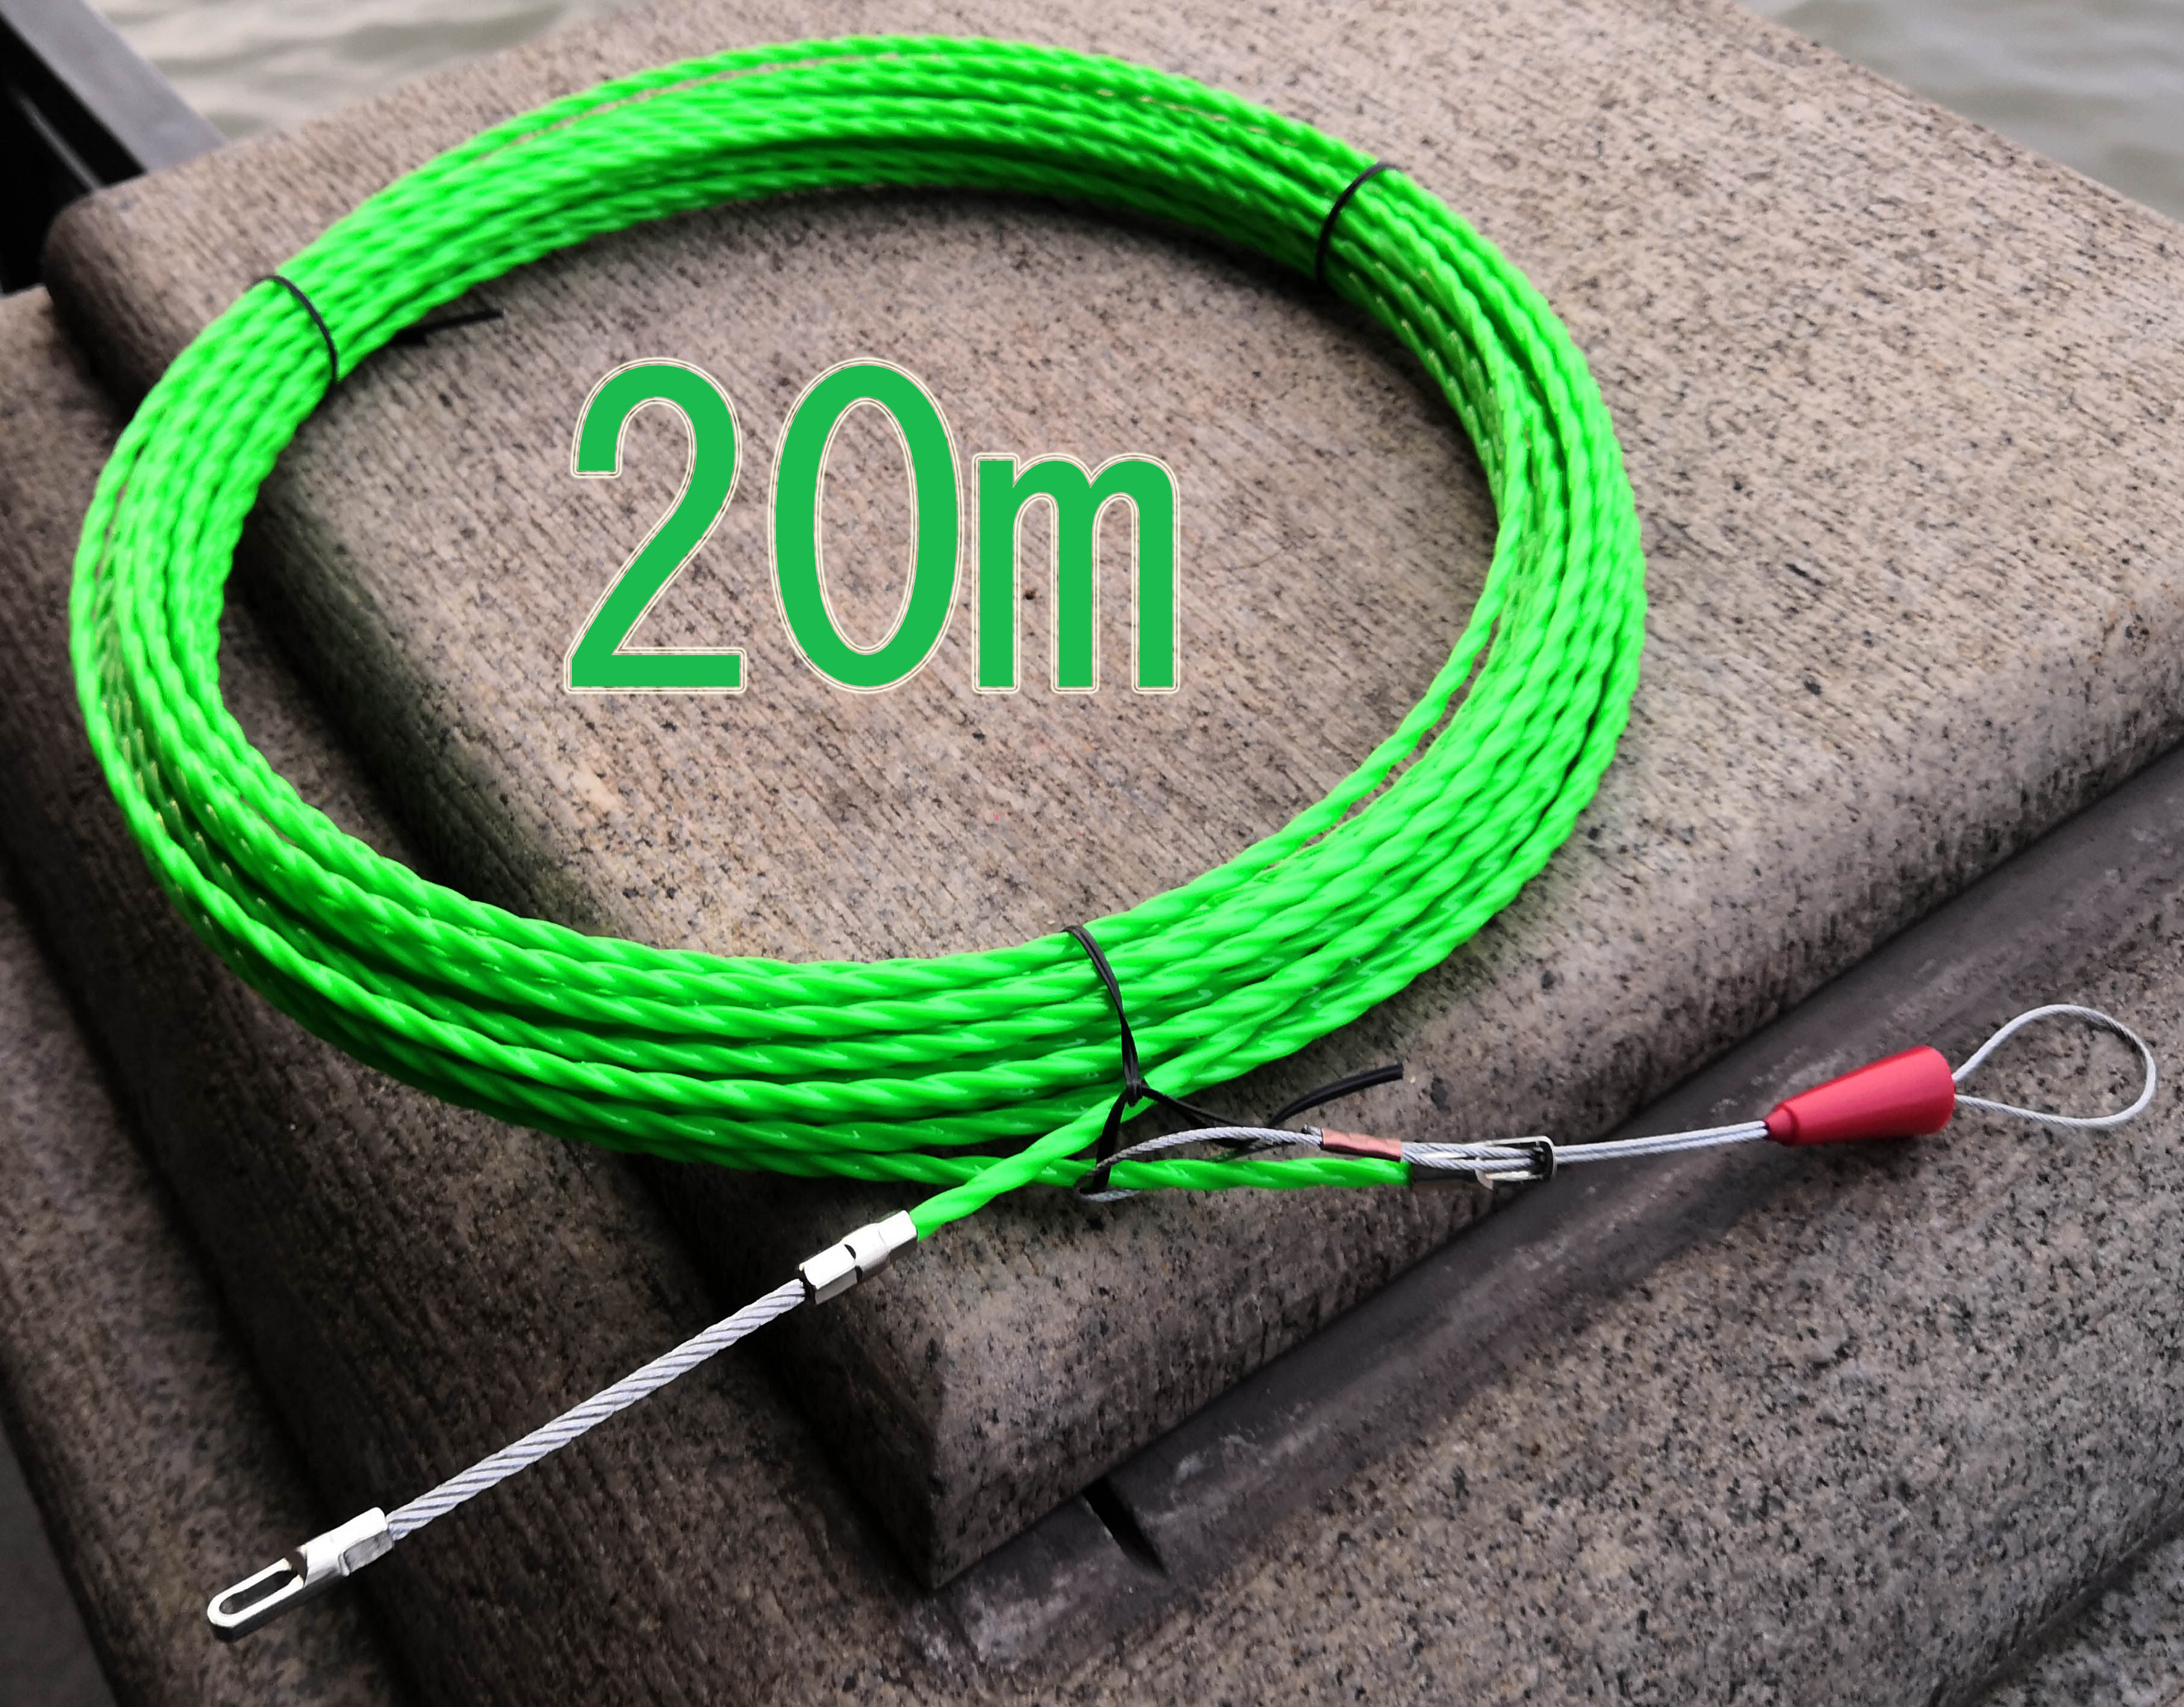 Aewio 20m Electrical Wire Cable Fish Tape Threader Wire Puller for Pulling  Wire Line (20m Green） - Aewio